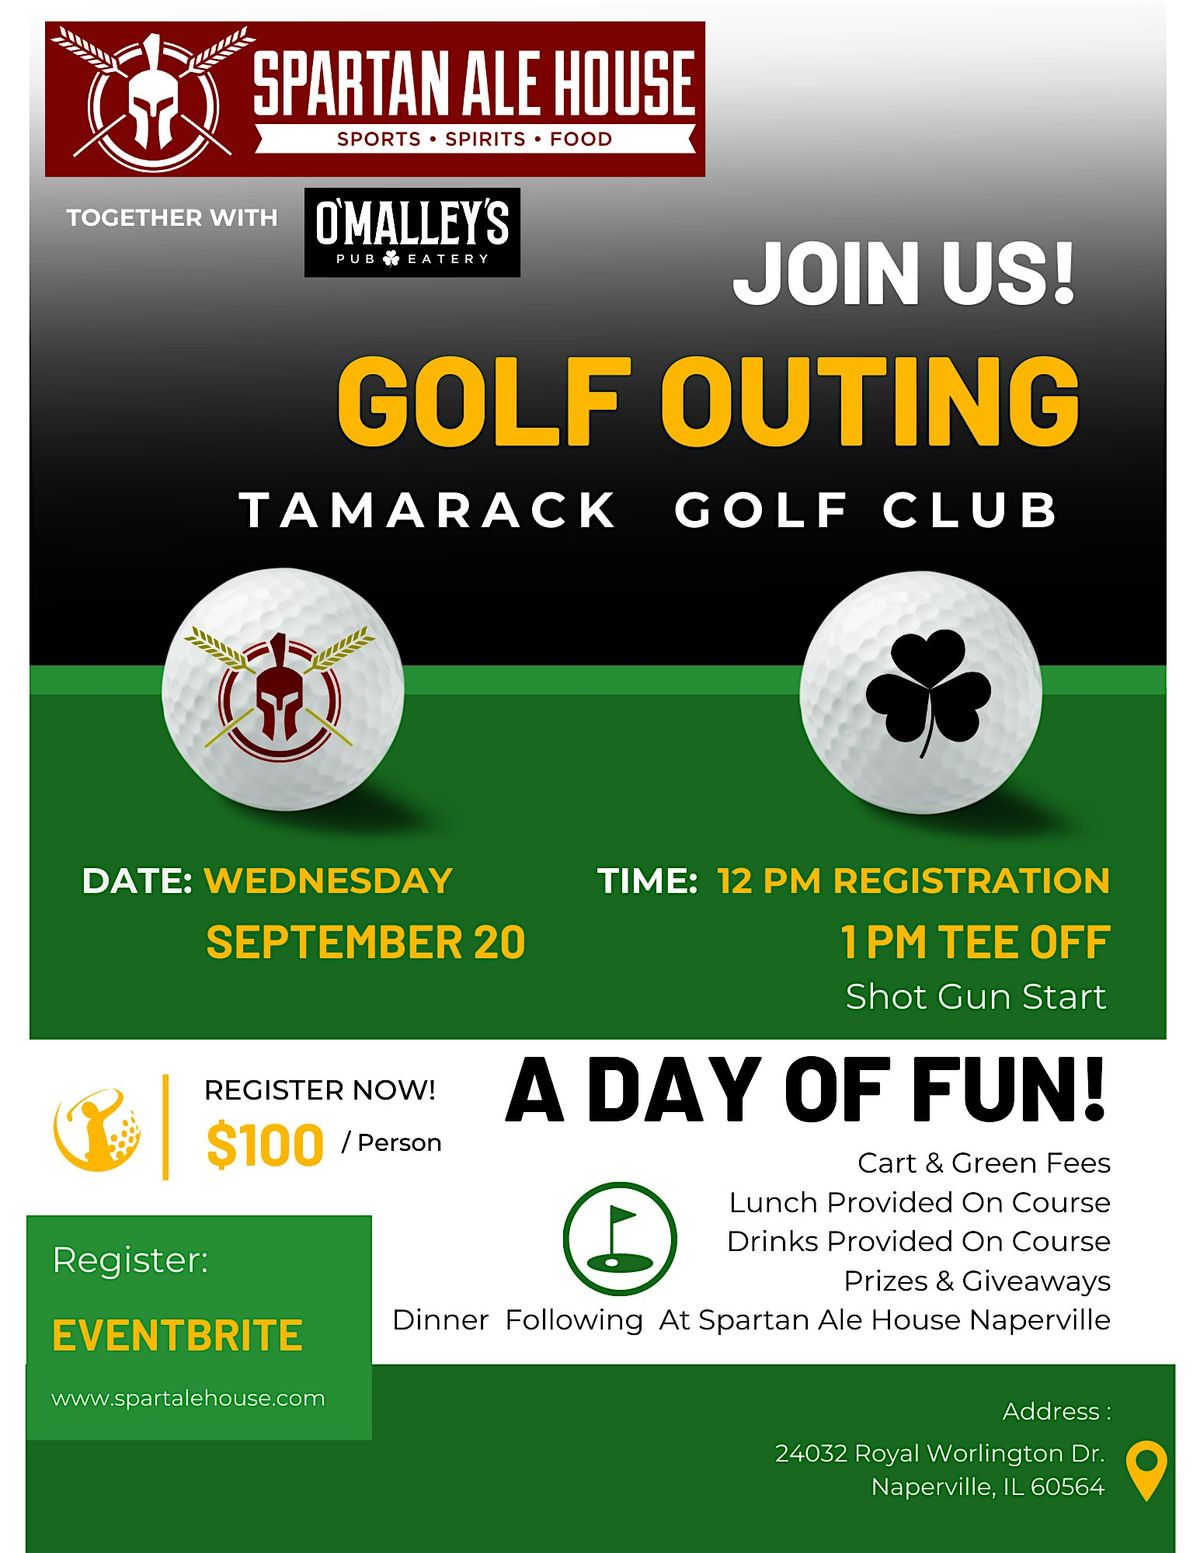 Spartan Ale House Golf Outing, September 15th